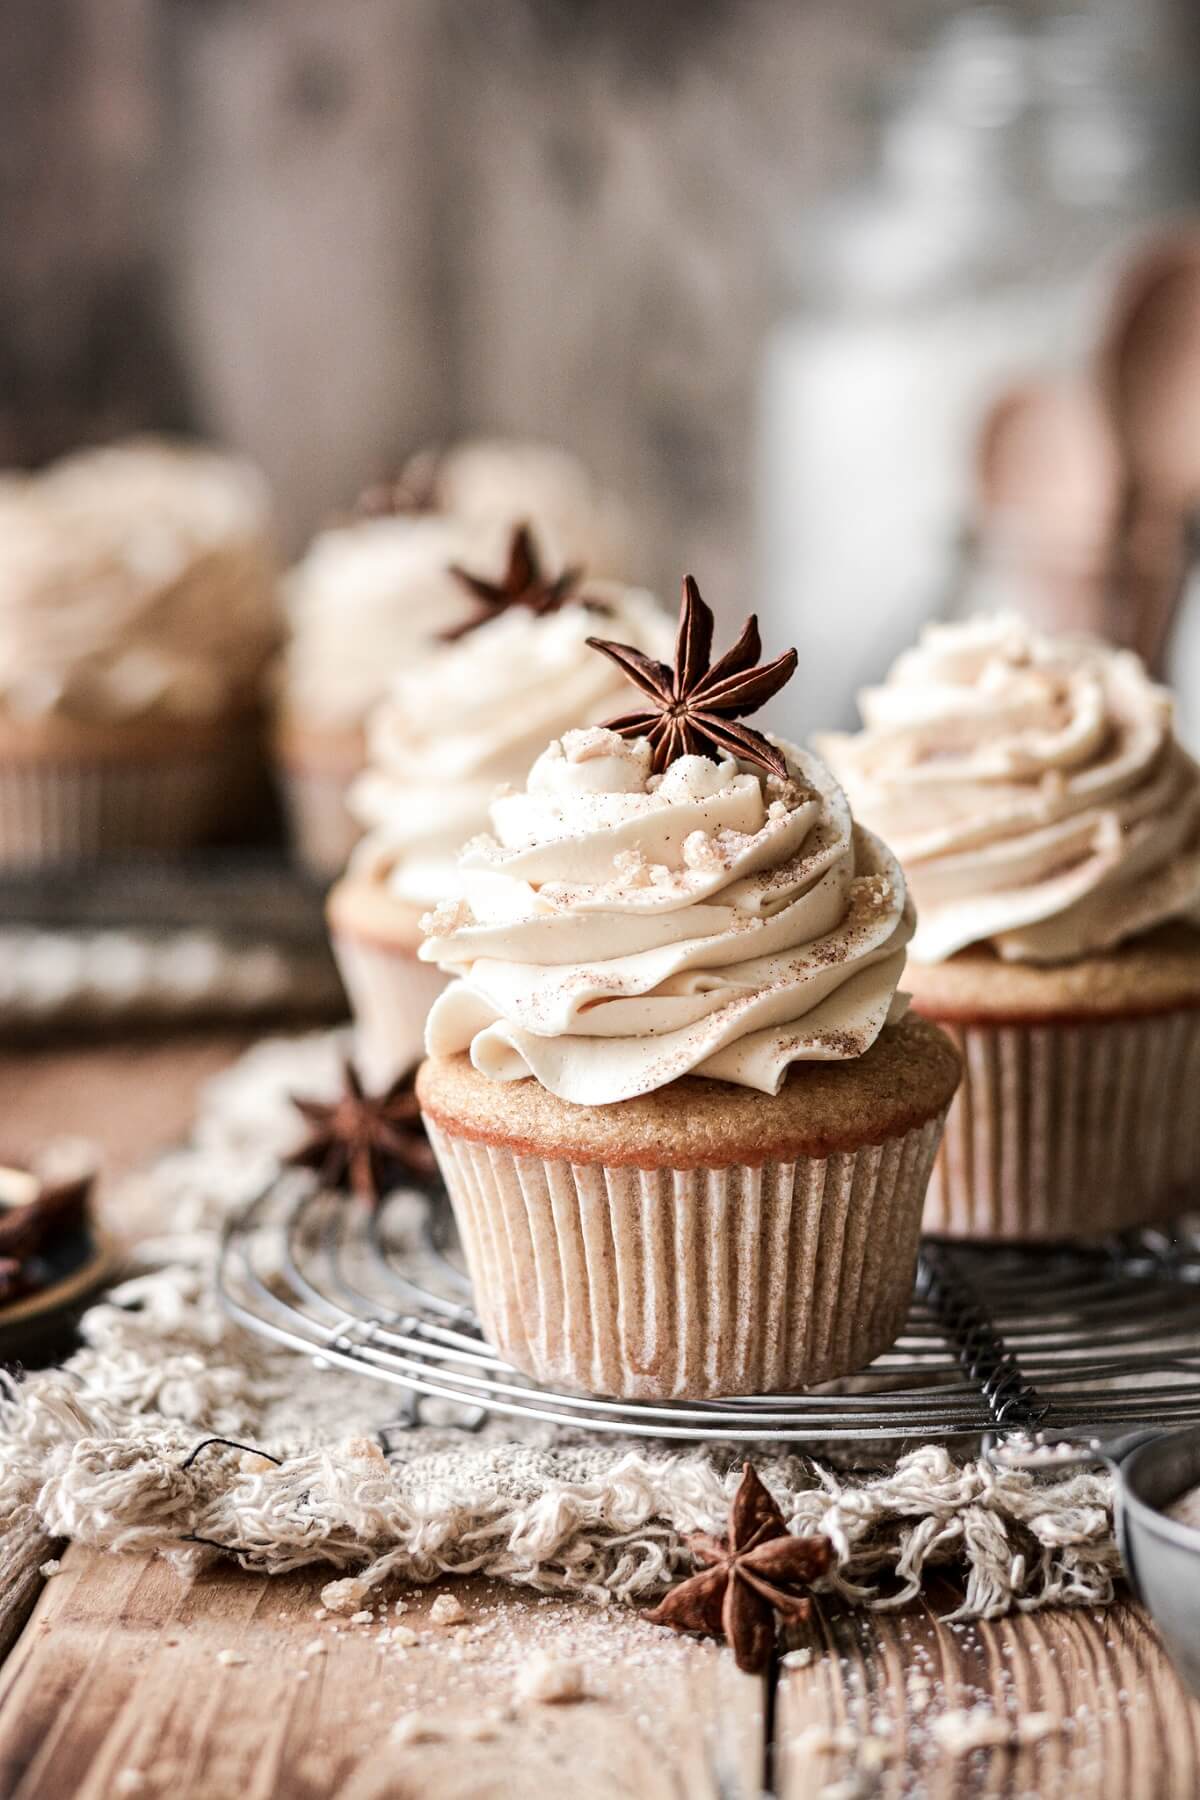 Brown sugar spice cupcakes topped with star anise.